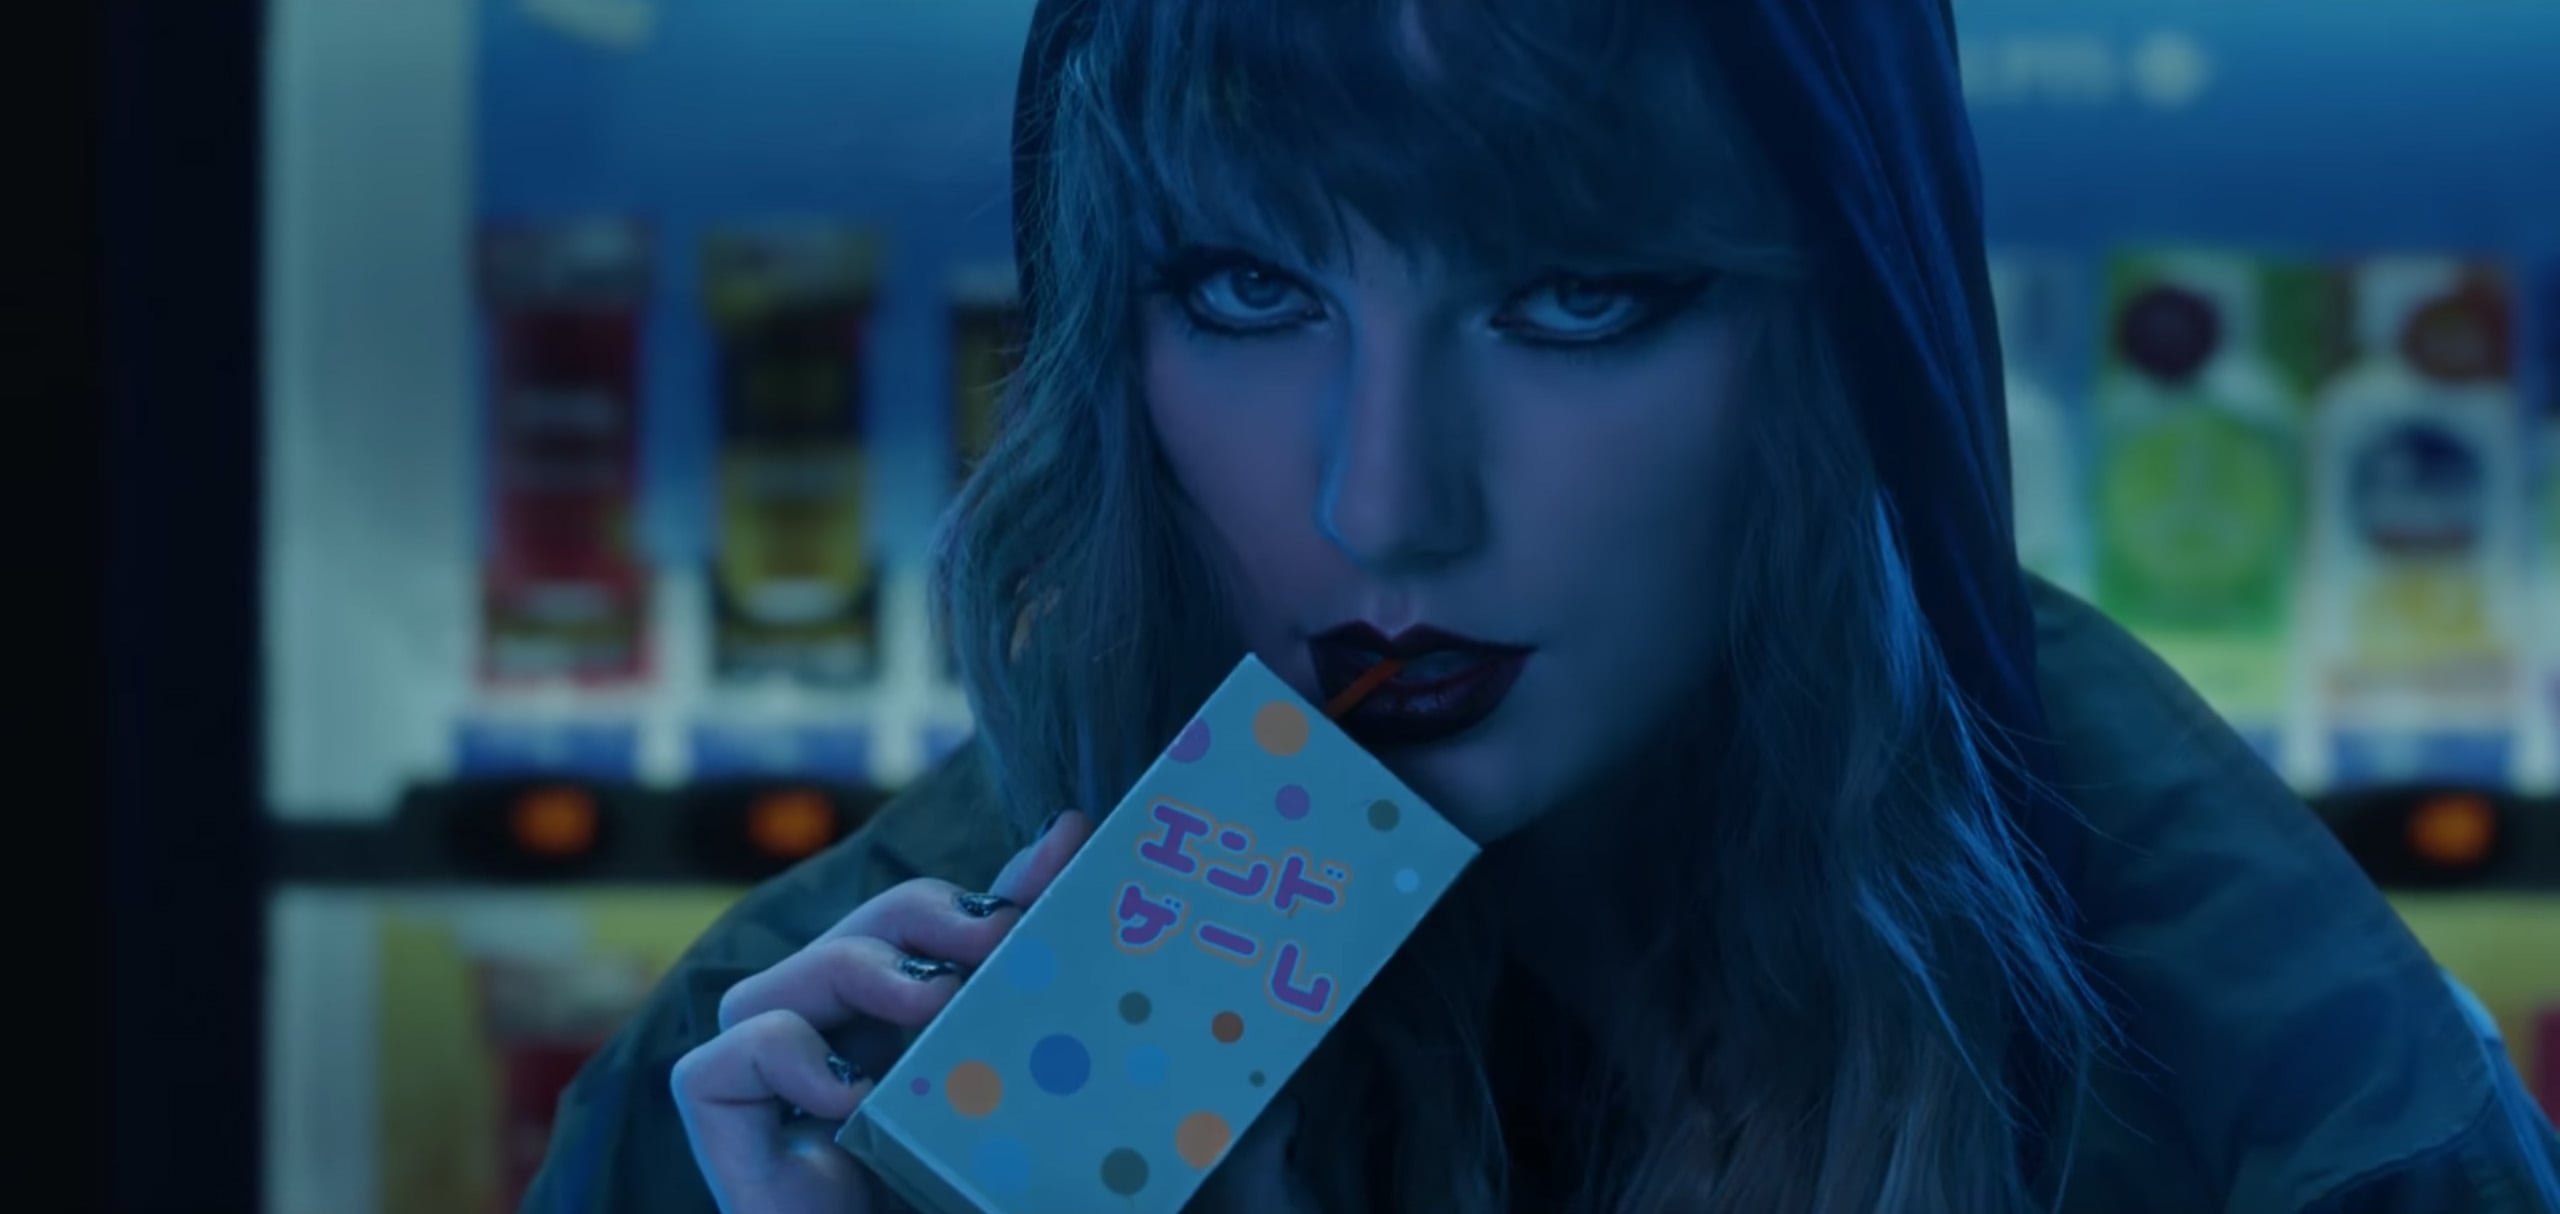 Taylor Swift End Game Video Meaning & Easter Eggs - Hidden